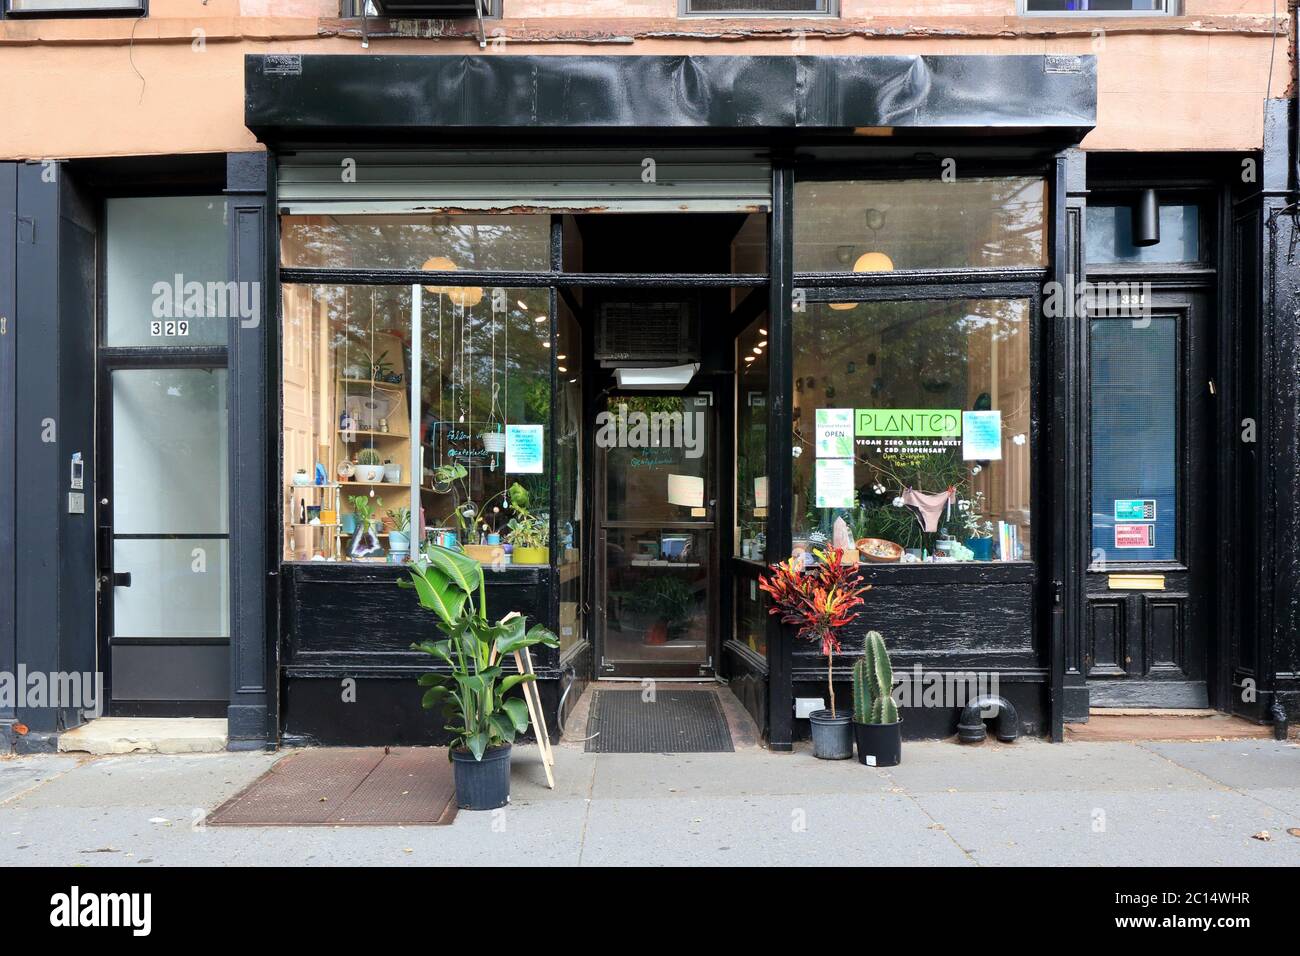 Planted Market, 331 Smith Street, Brooklyn, NY. exterior storefront of a vegan zero waste market in Carroll Gardens with a cafe next door Stock Photo